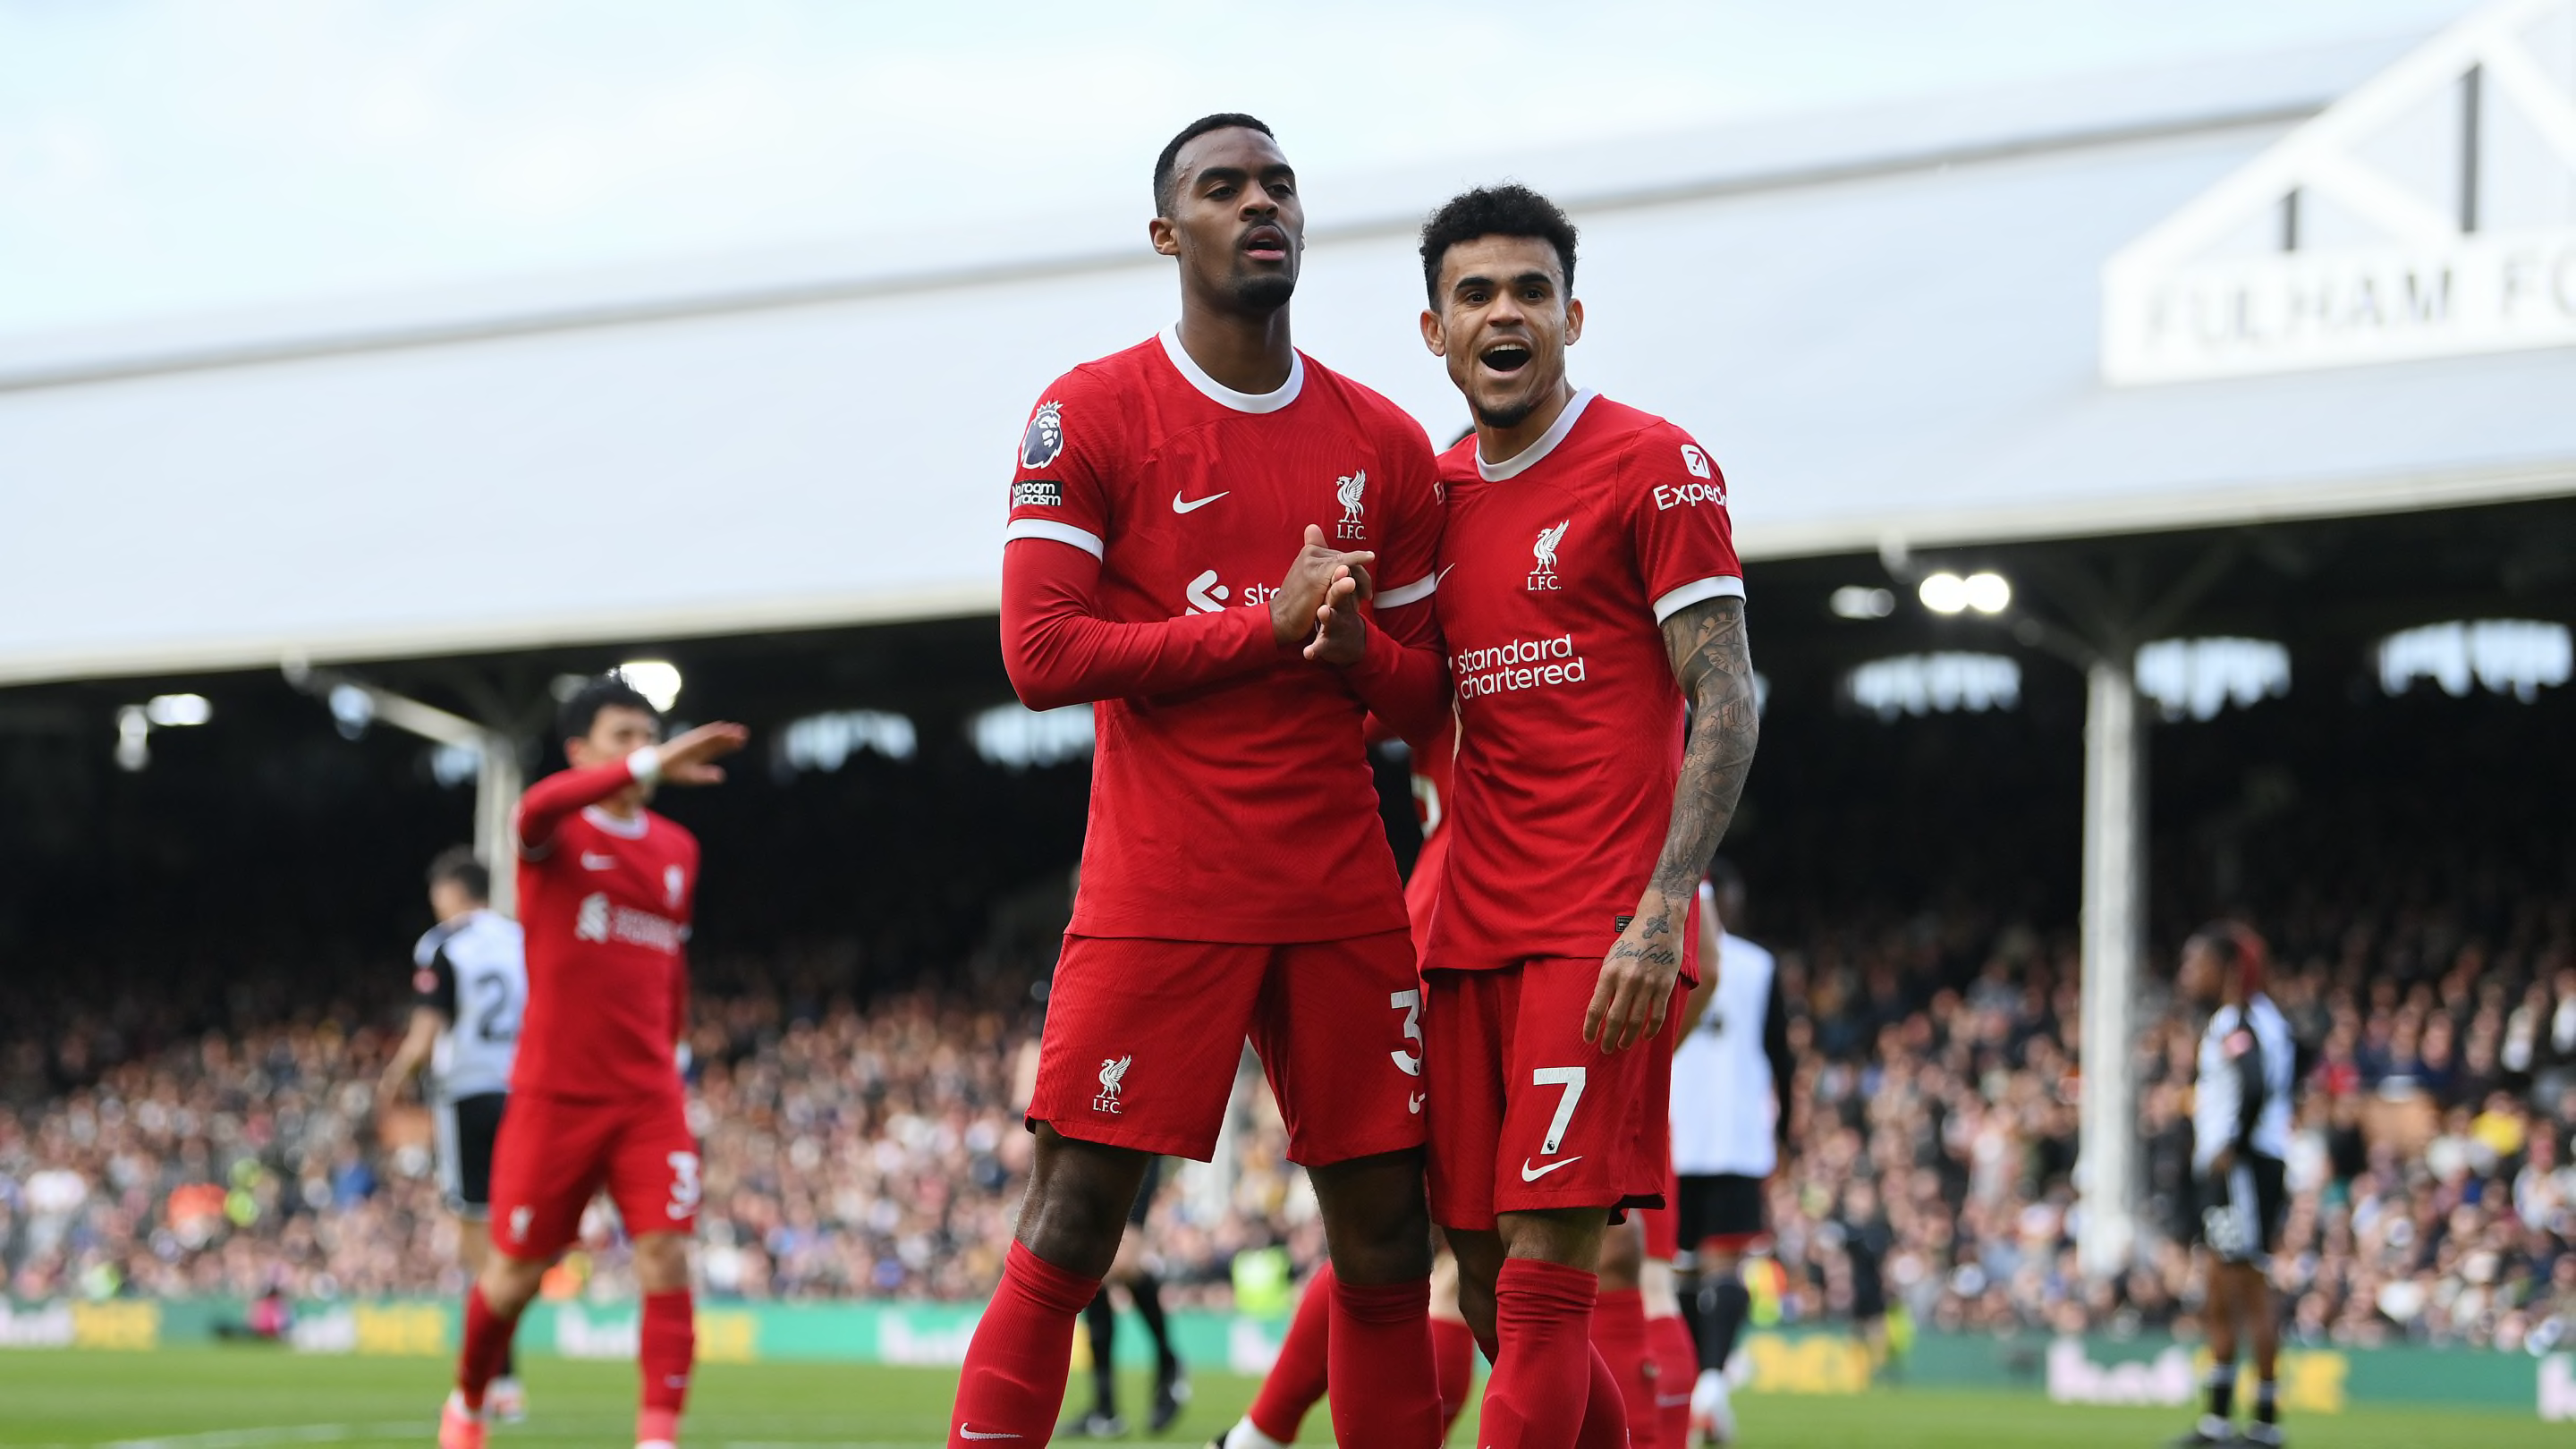 Fulham 1-3 Liverpool: Player ratings as the Reds earn crucial win at Craven Cottage